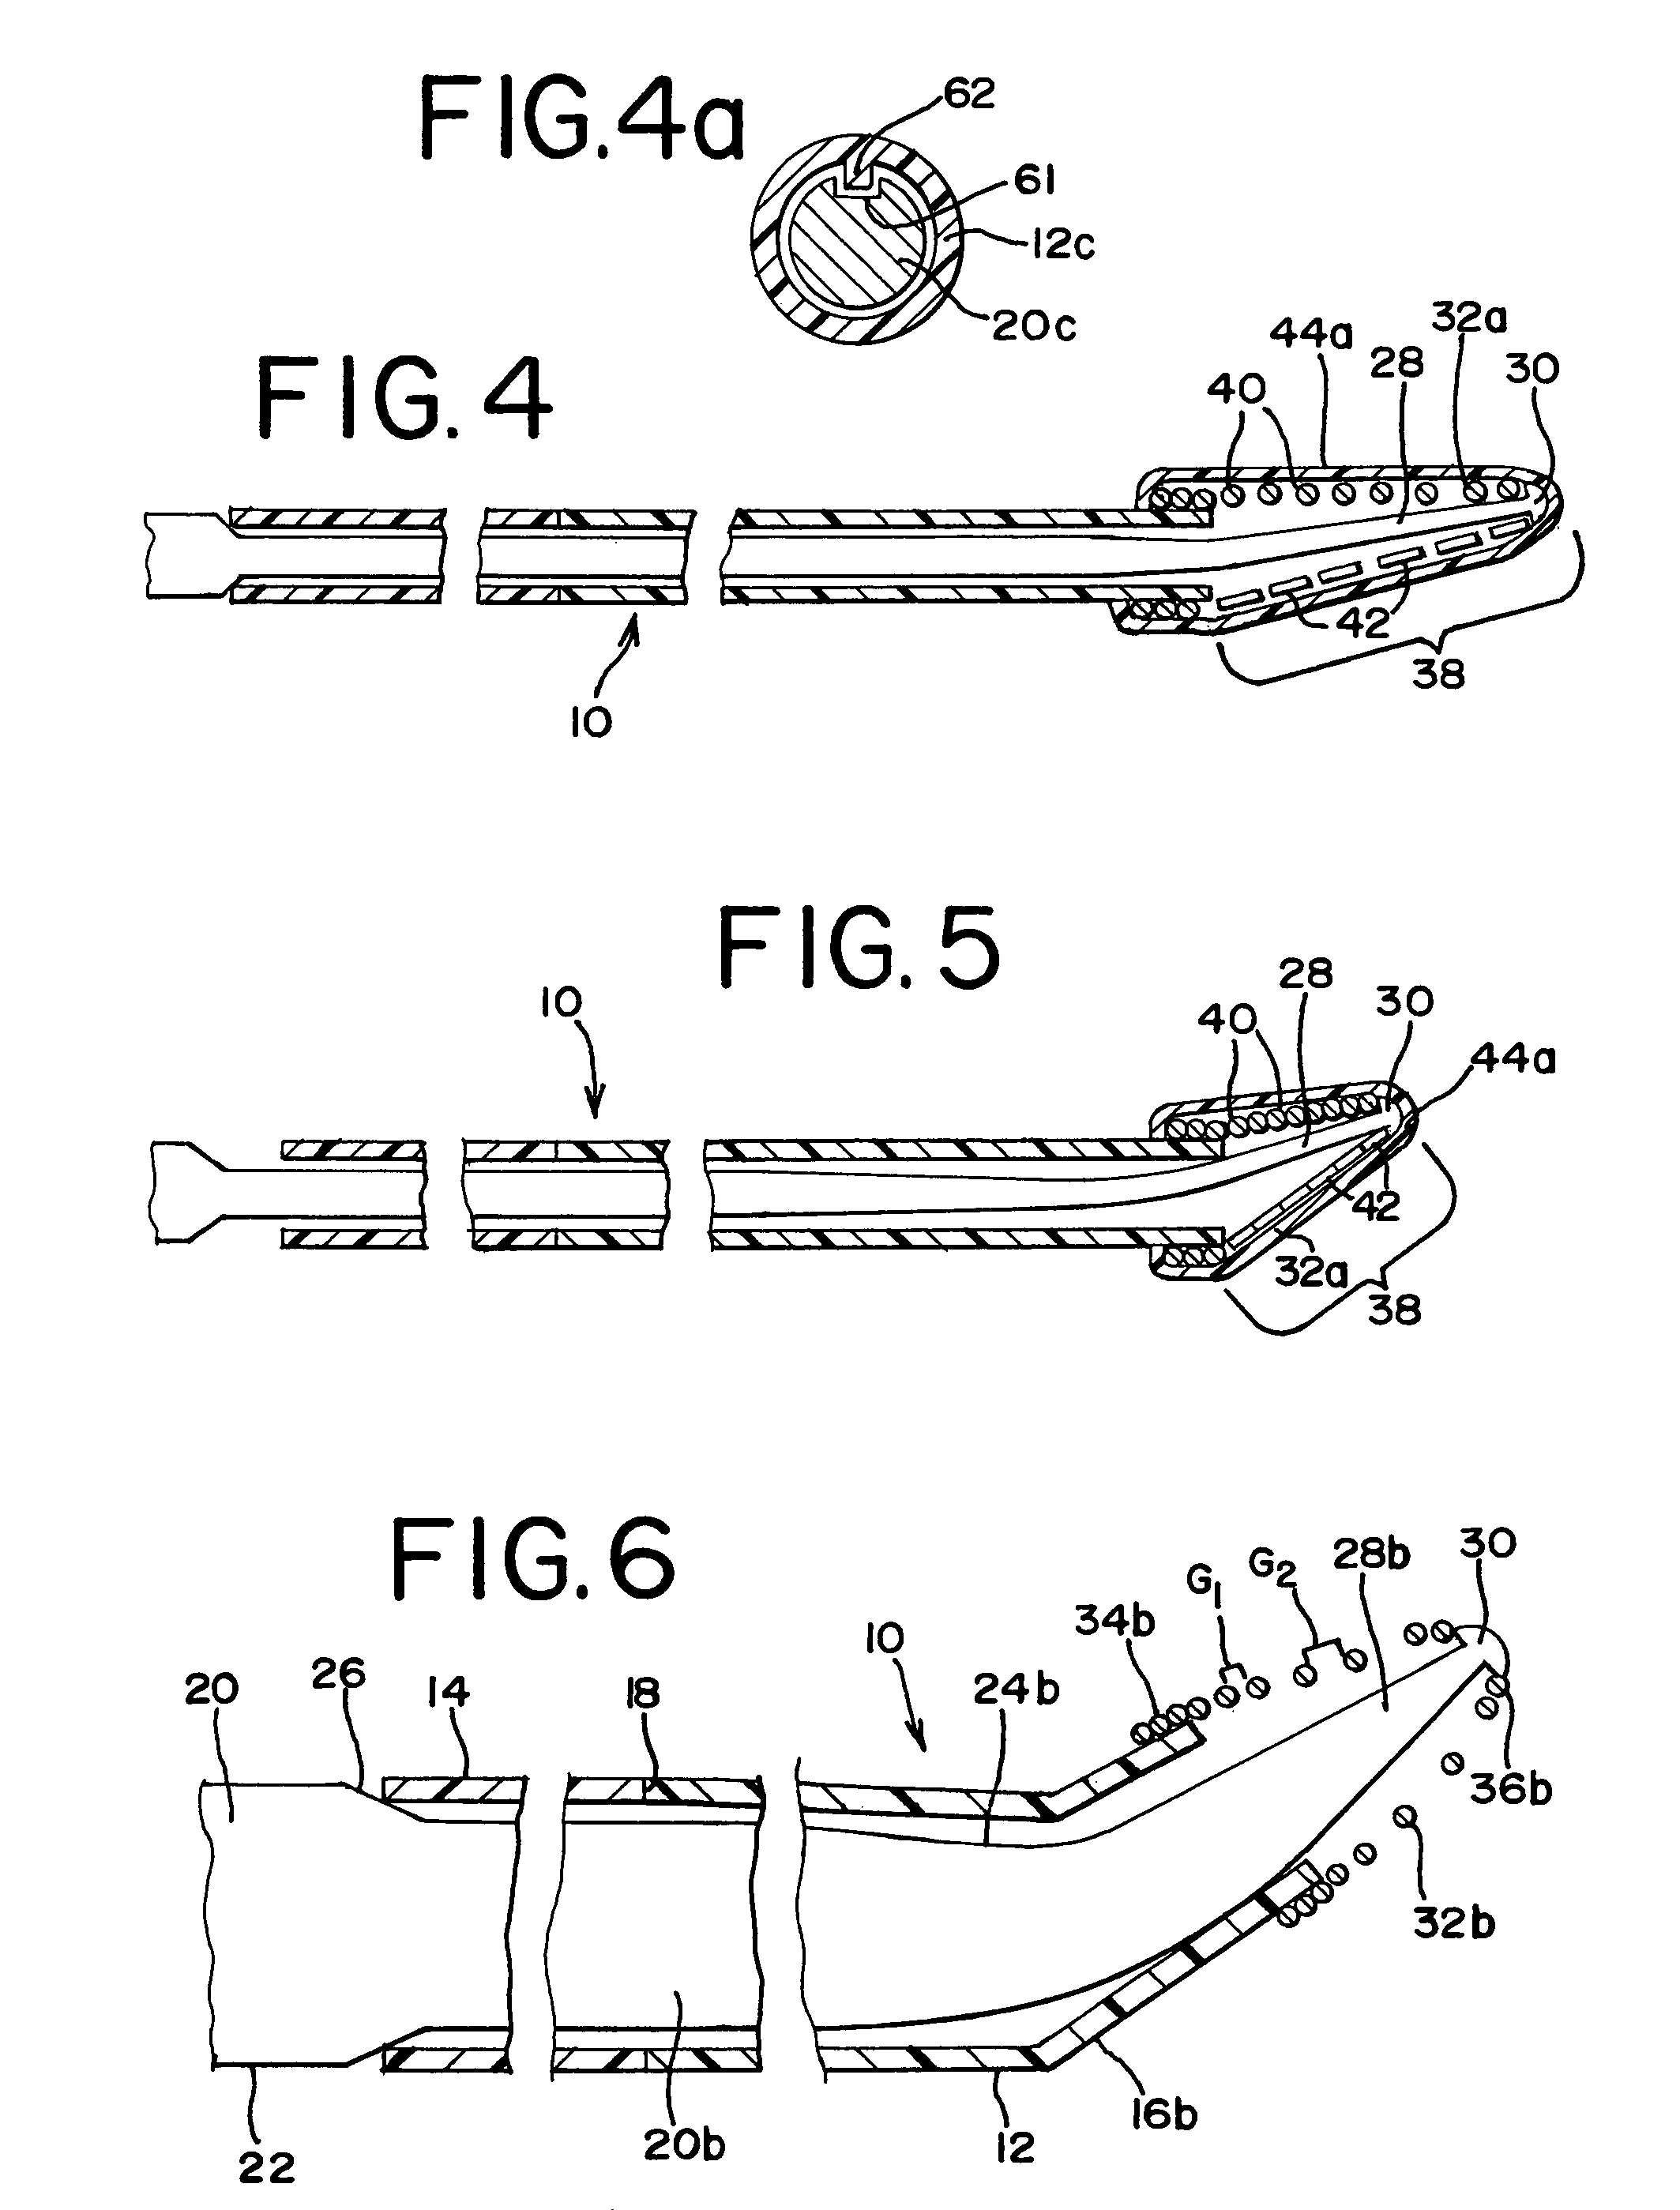 Variable stiffness guidewire